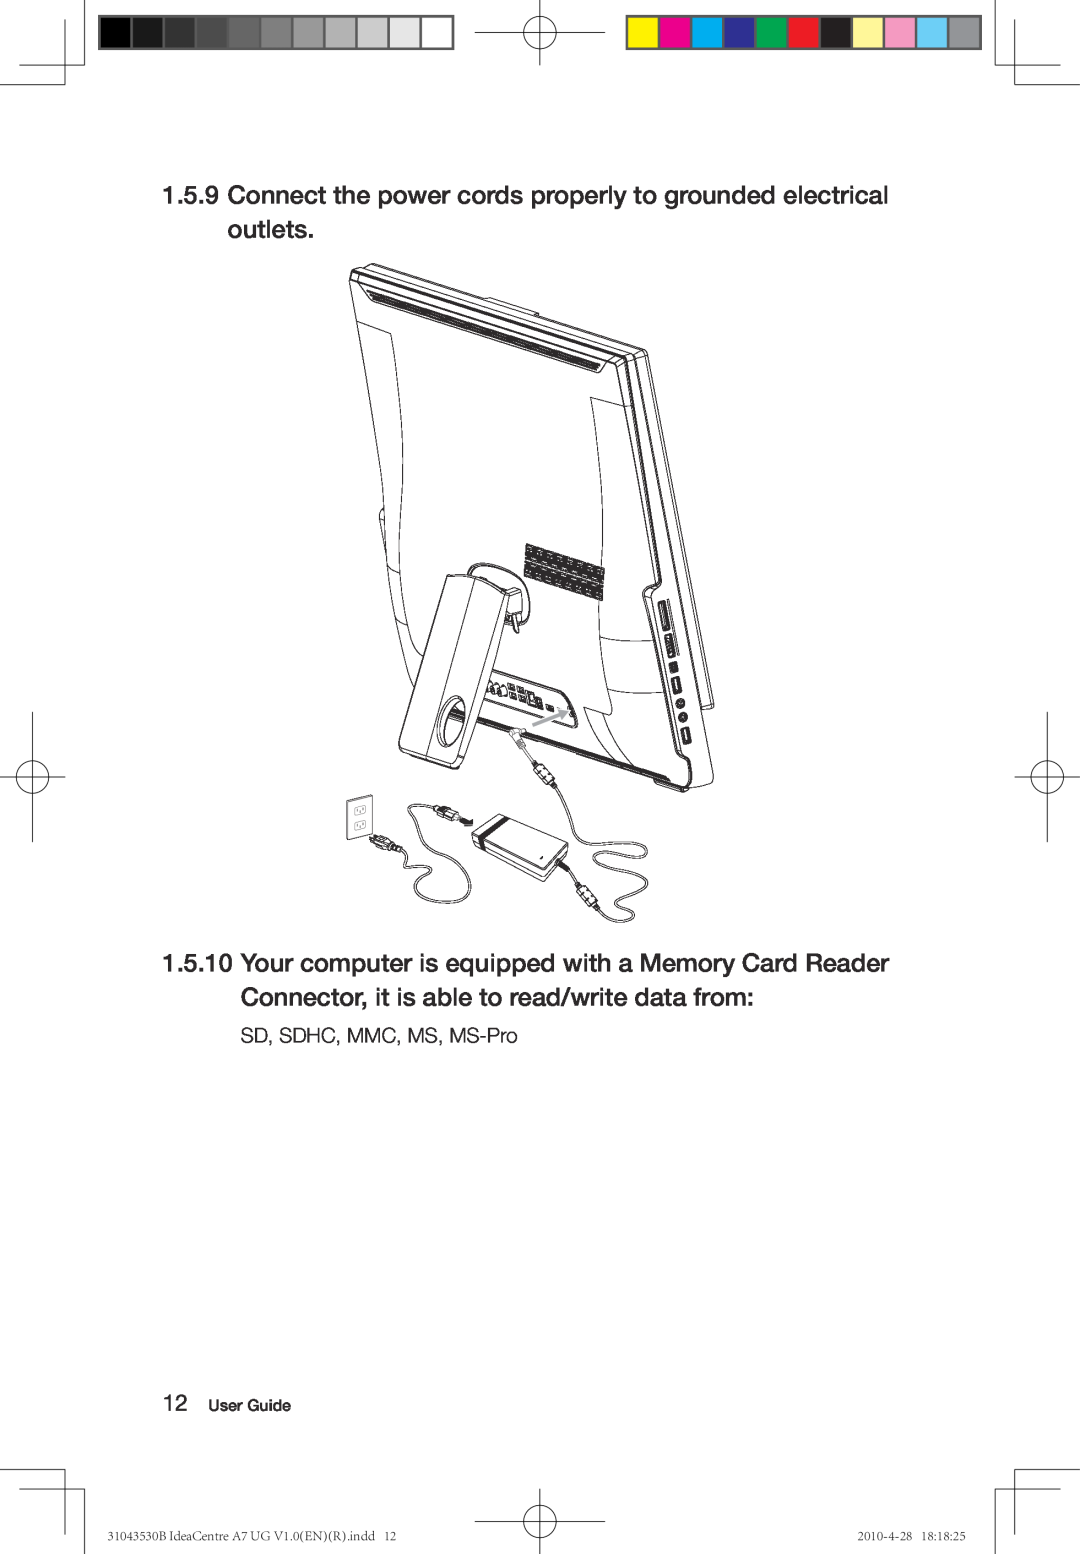 Lenovo A7 manual Connect the power cords properly to grounded electrical outlets, SD, SDHC, MMC, MS, MS-Pro, User Guide 